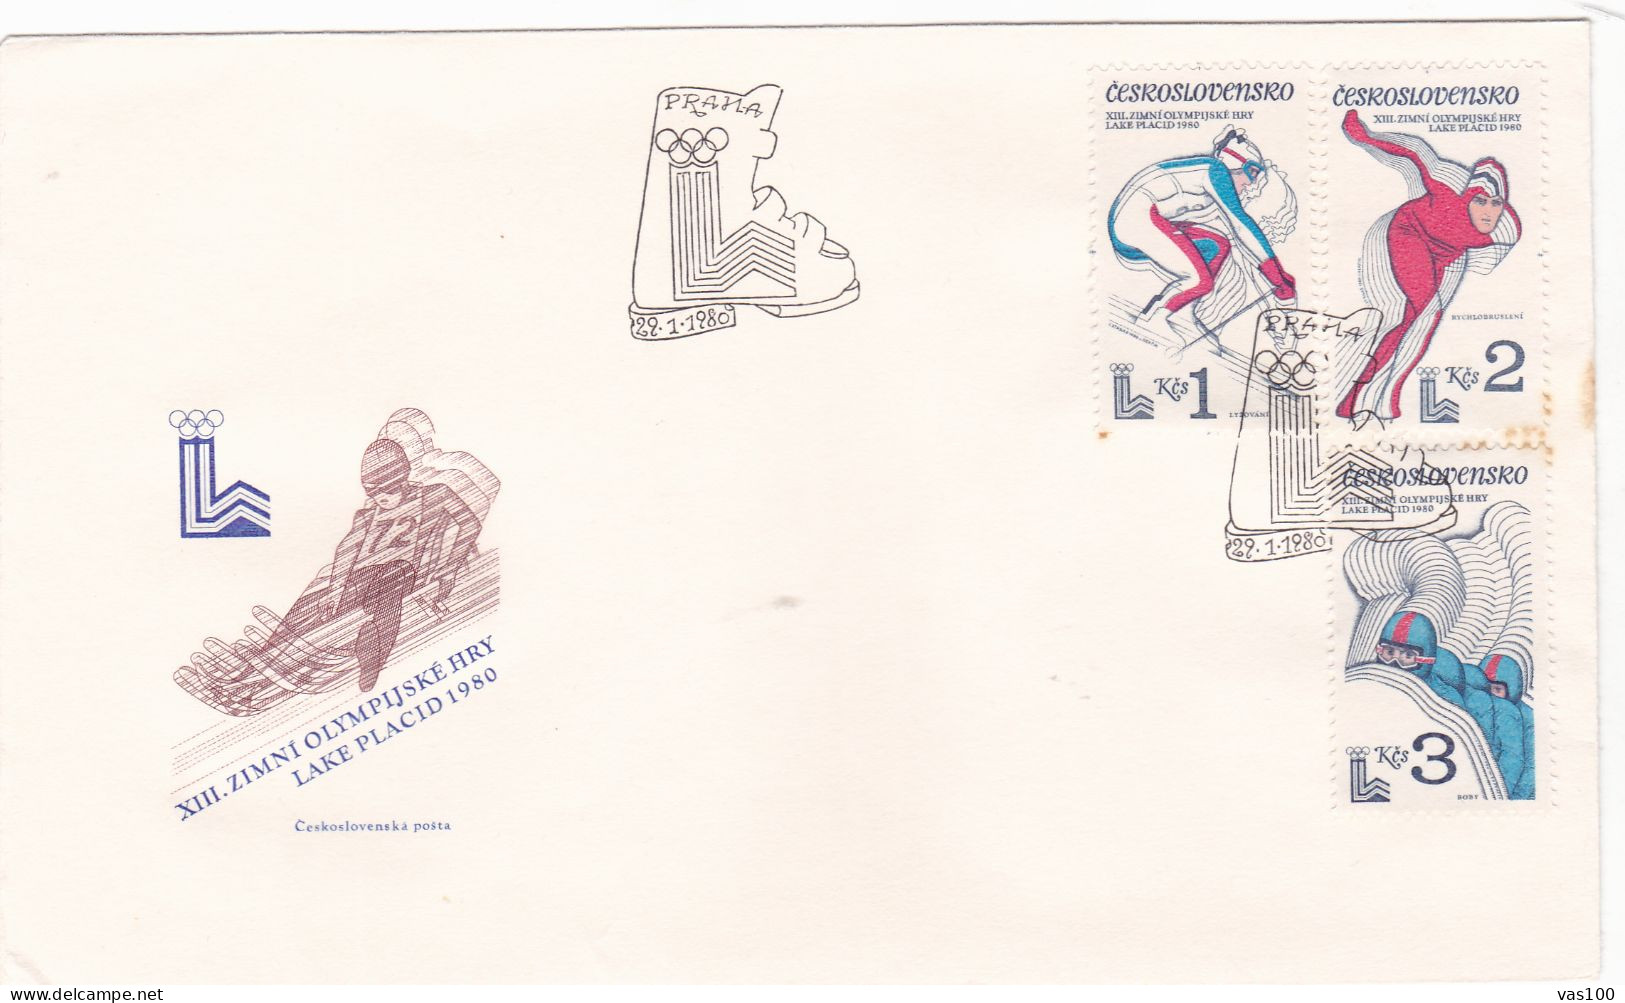 OLYMPIC GAMES LAKE PLACID 1980 COVERS  FDC  CIRCULATED  Tchécoslovaquie - Briefe U. Dokumente